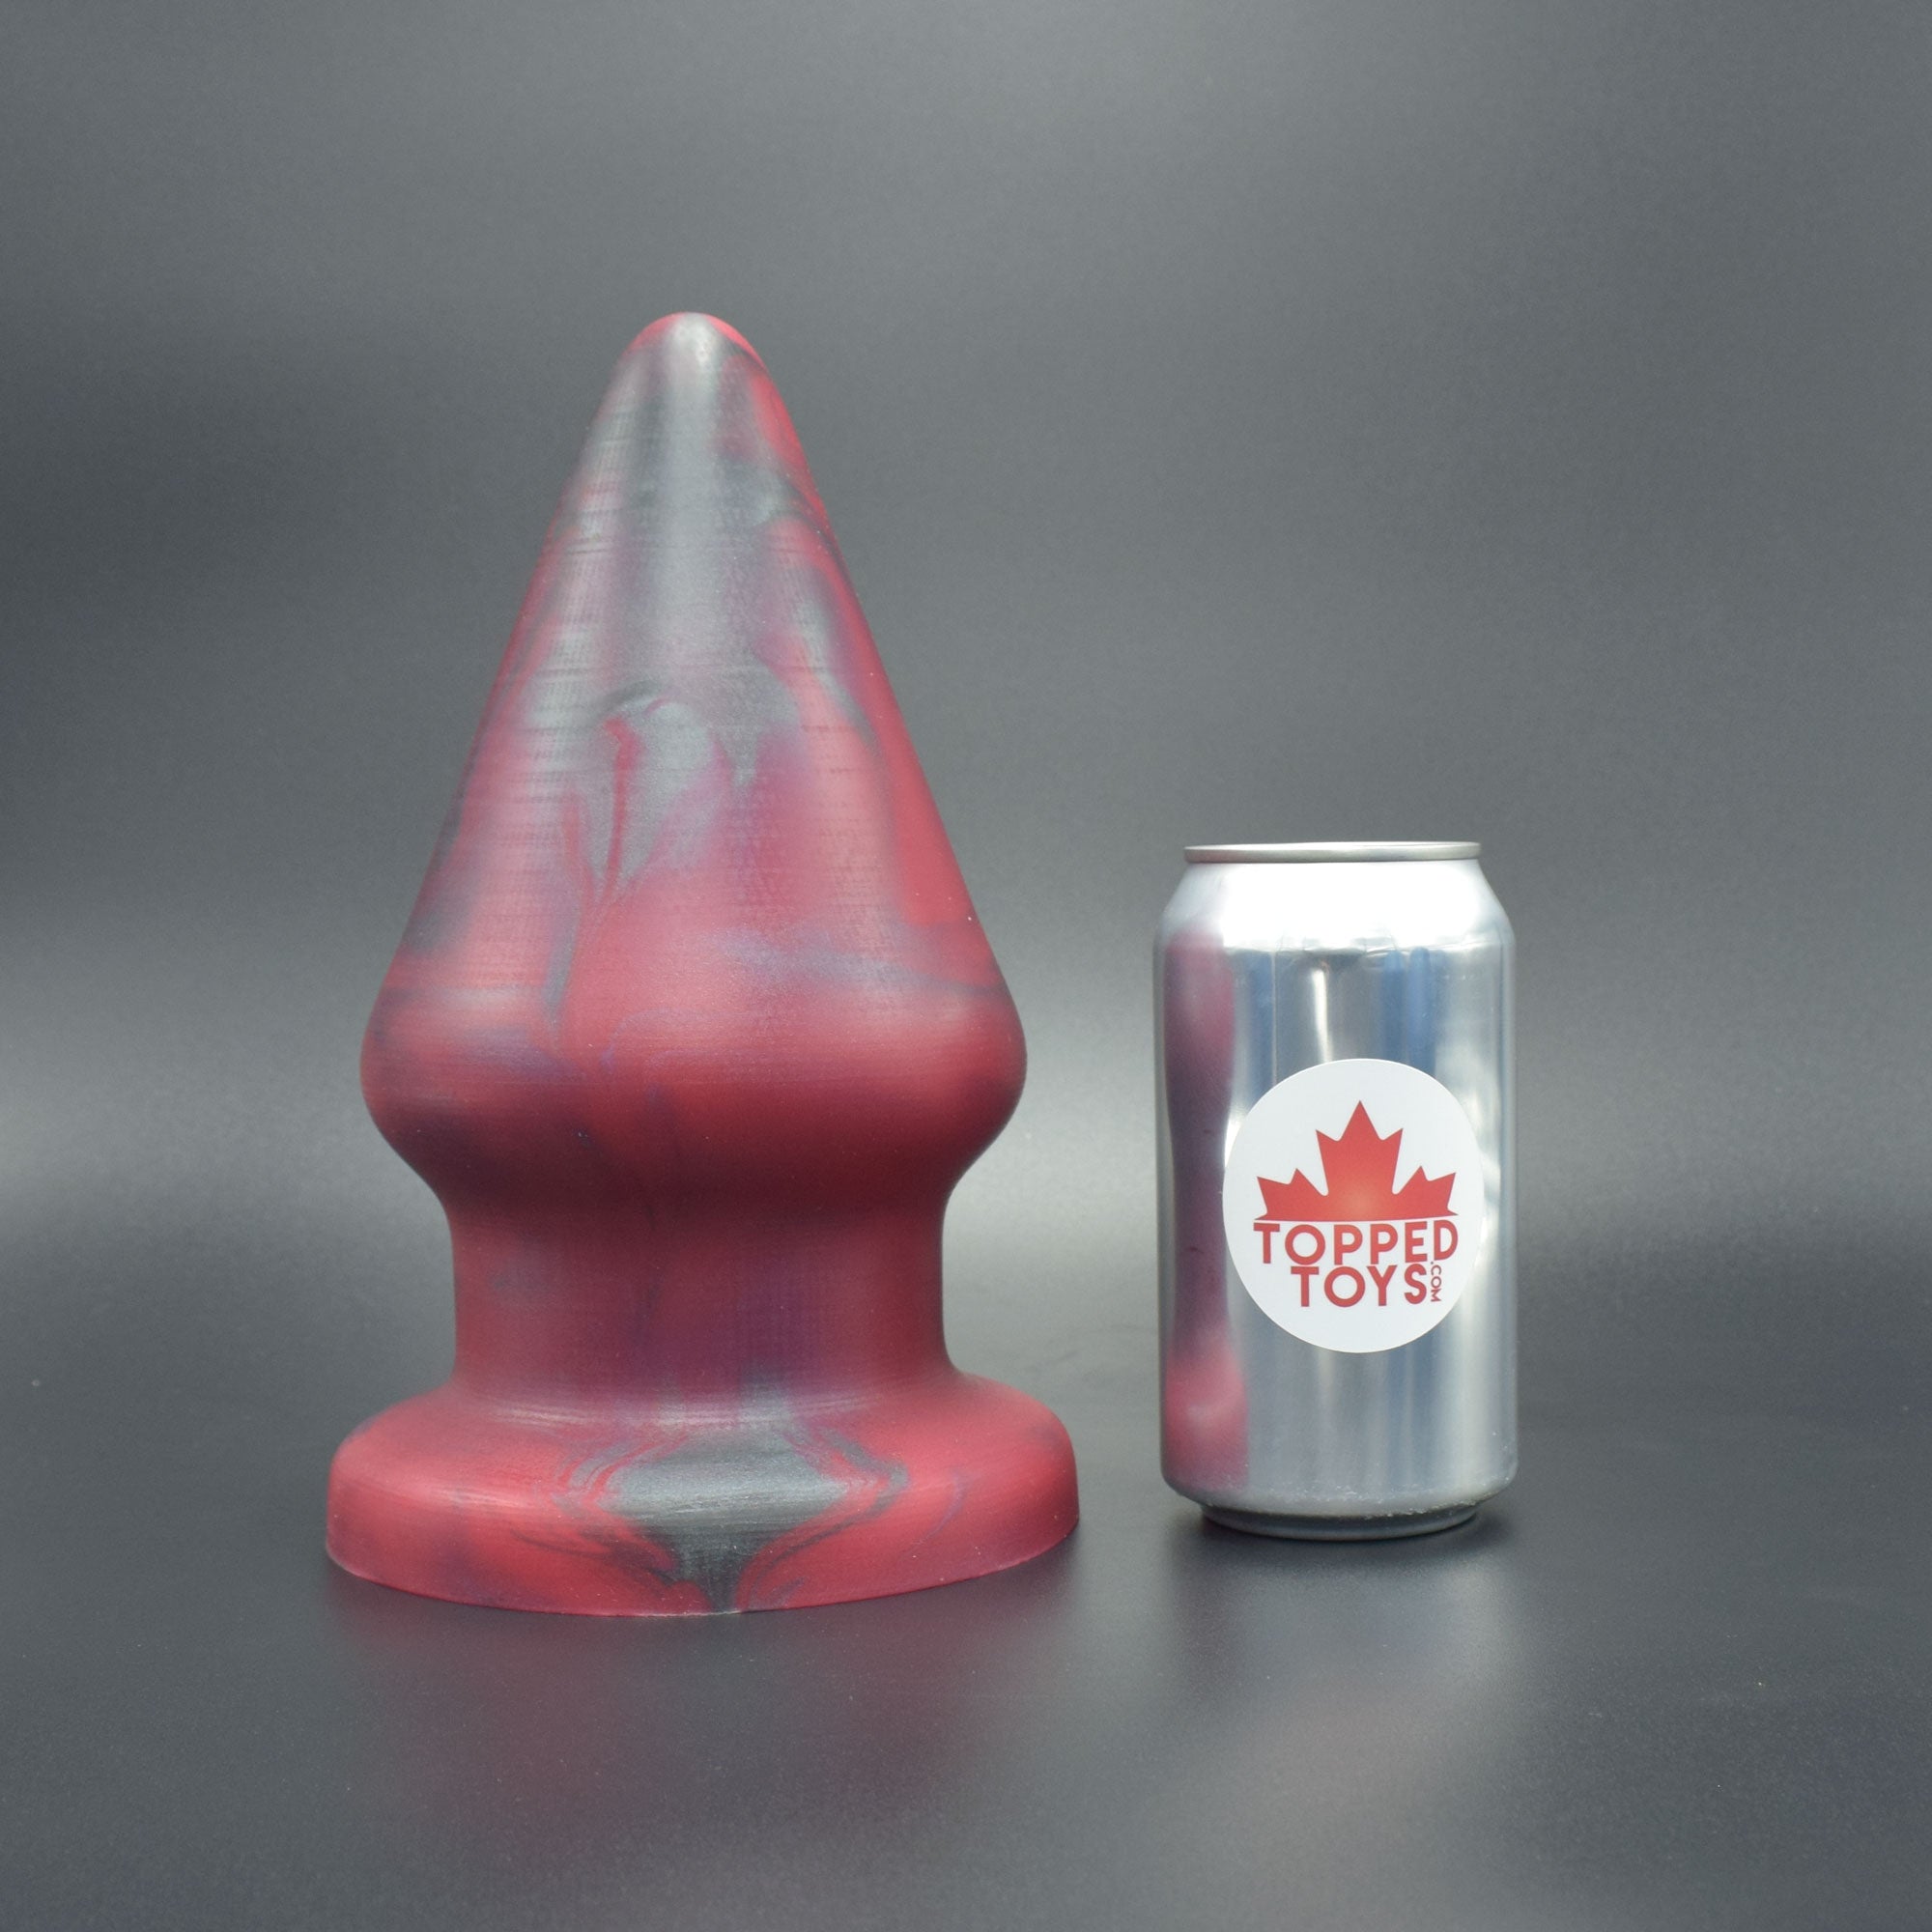 Grip 150 in Forge Red, next to pop can with Topped Toys logo